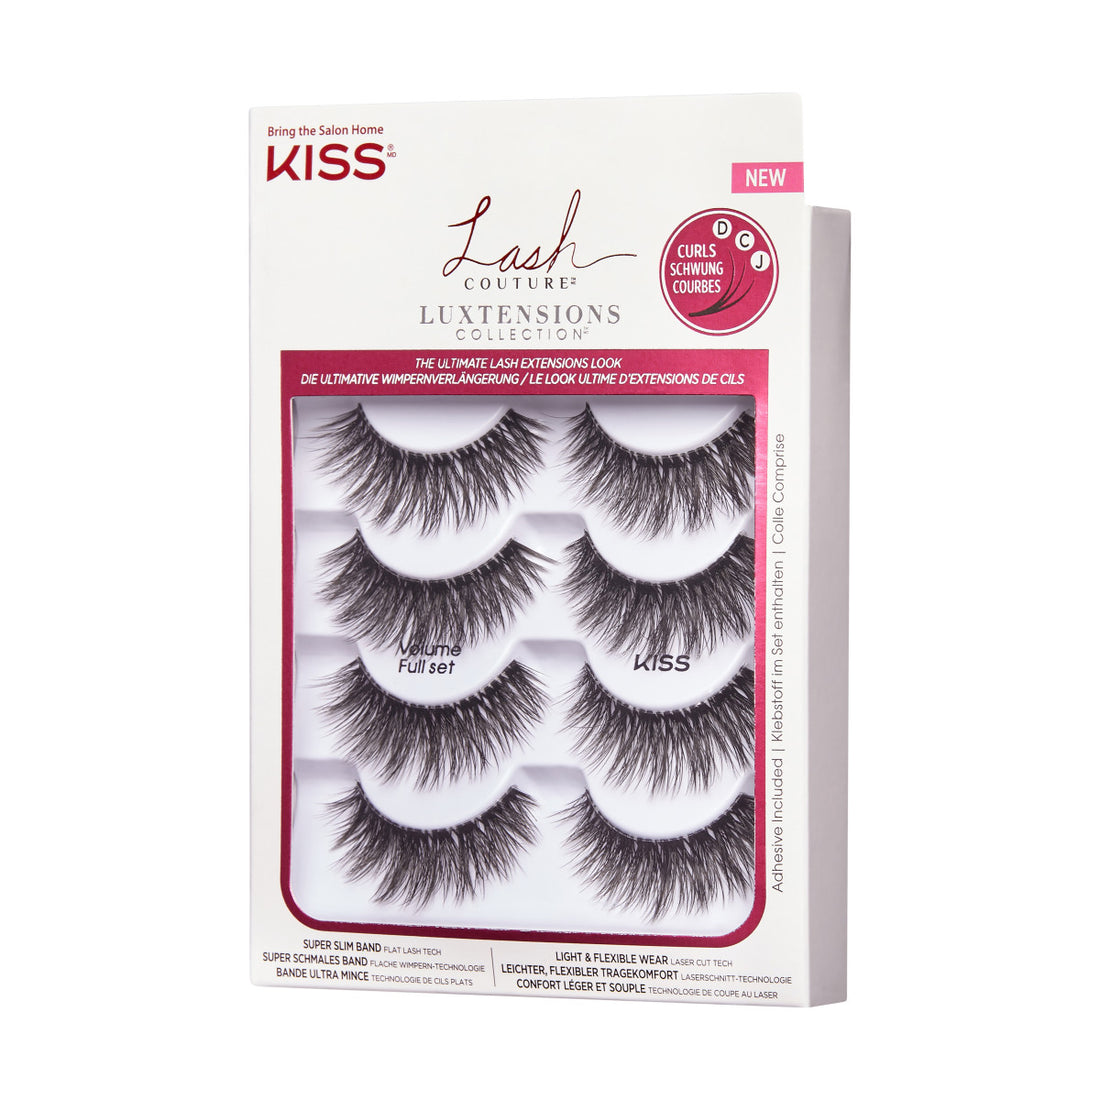 Lash Couture LuXtensions Multipack- Volume Full Set